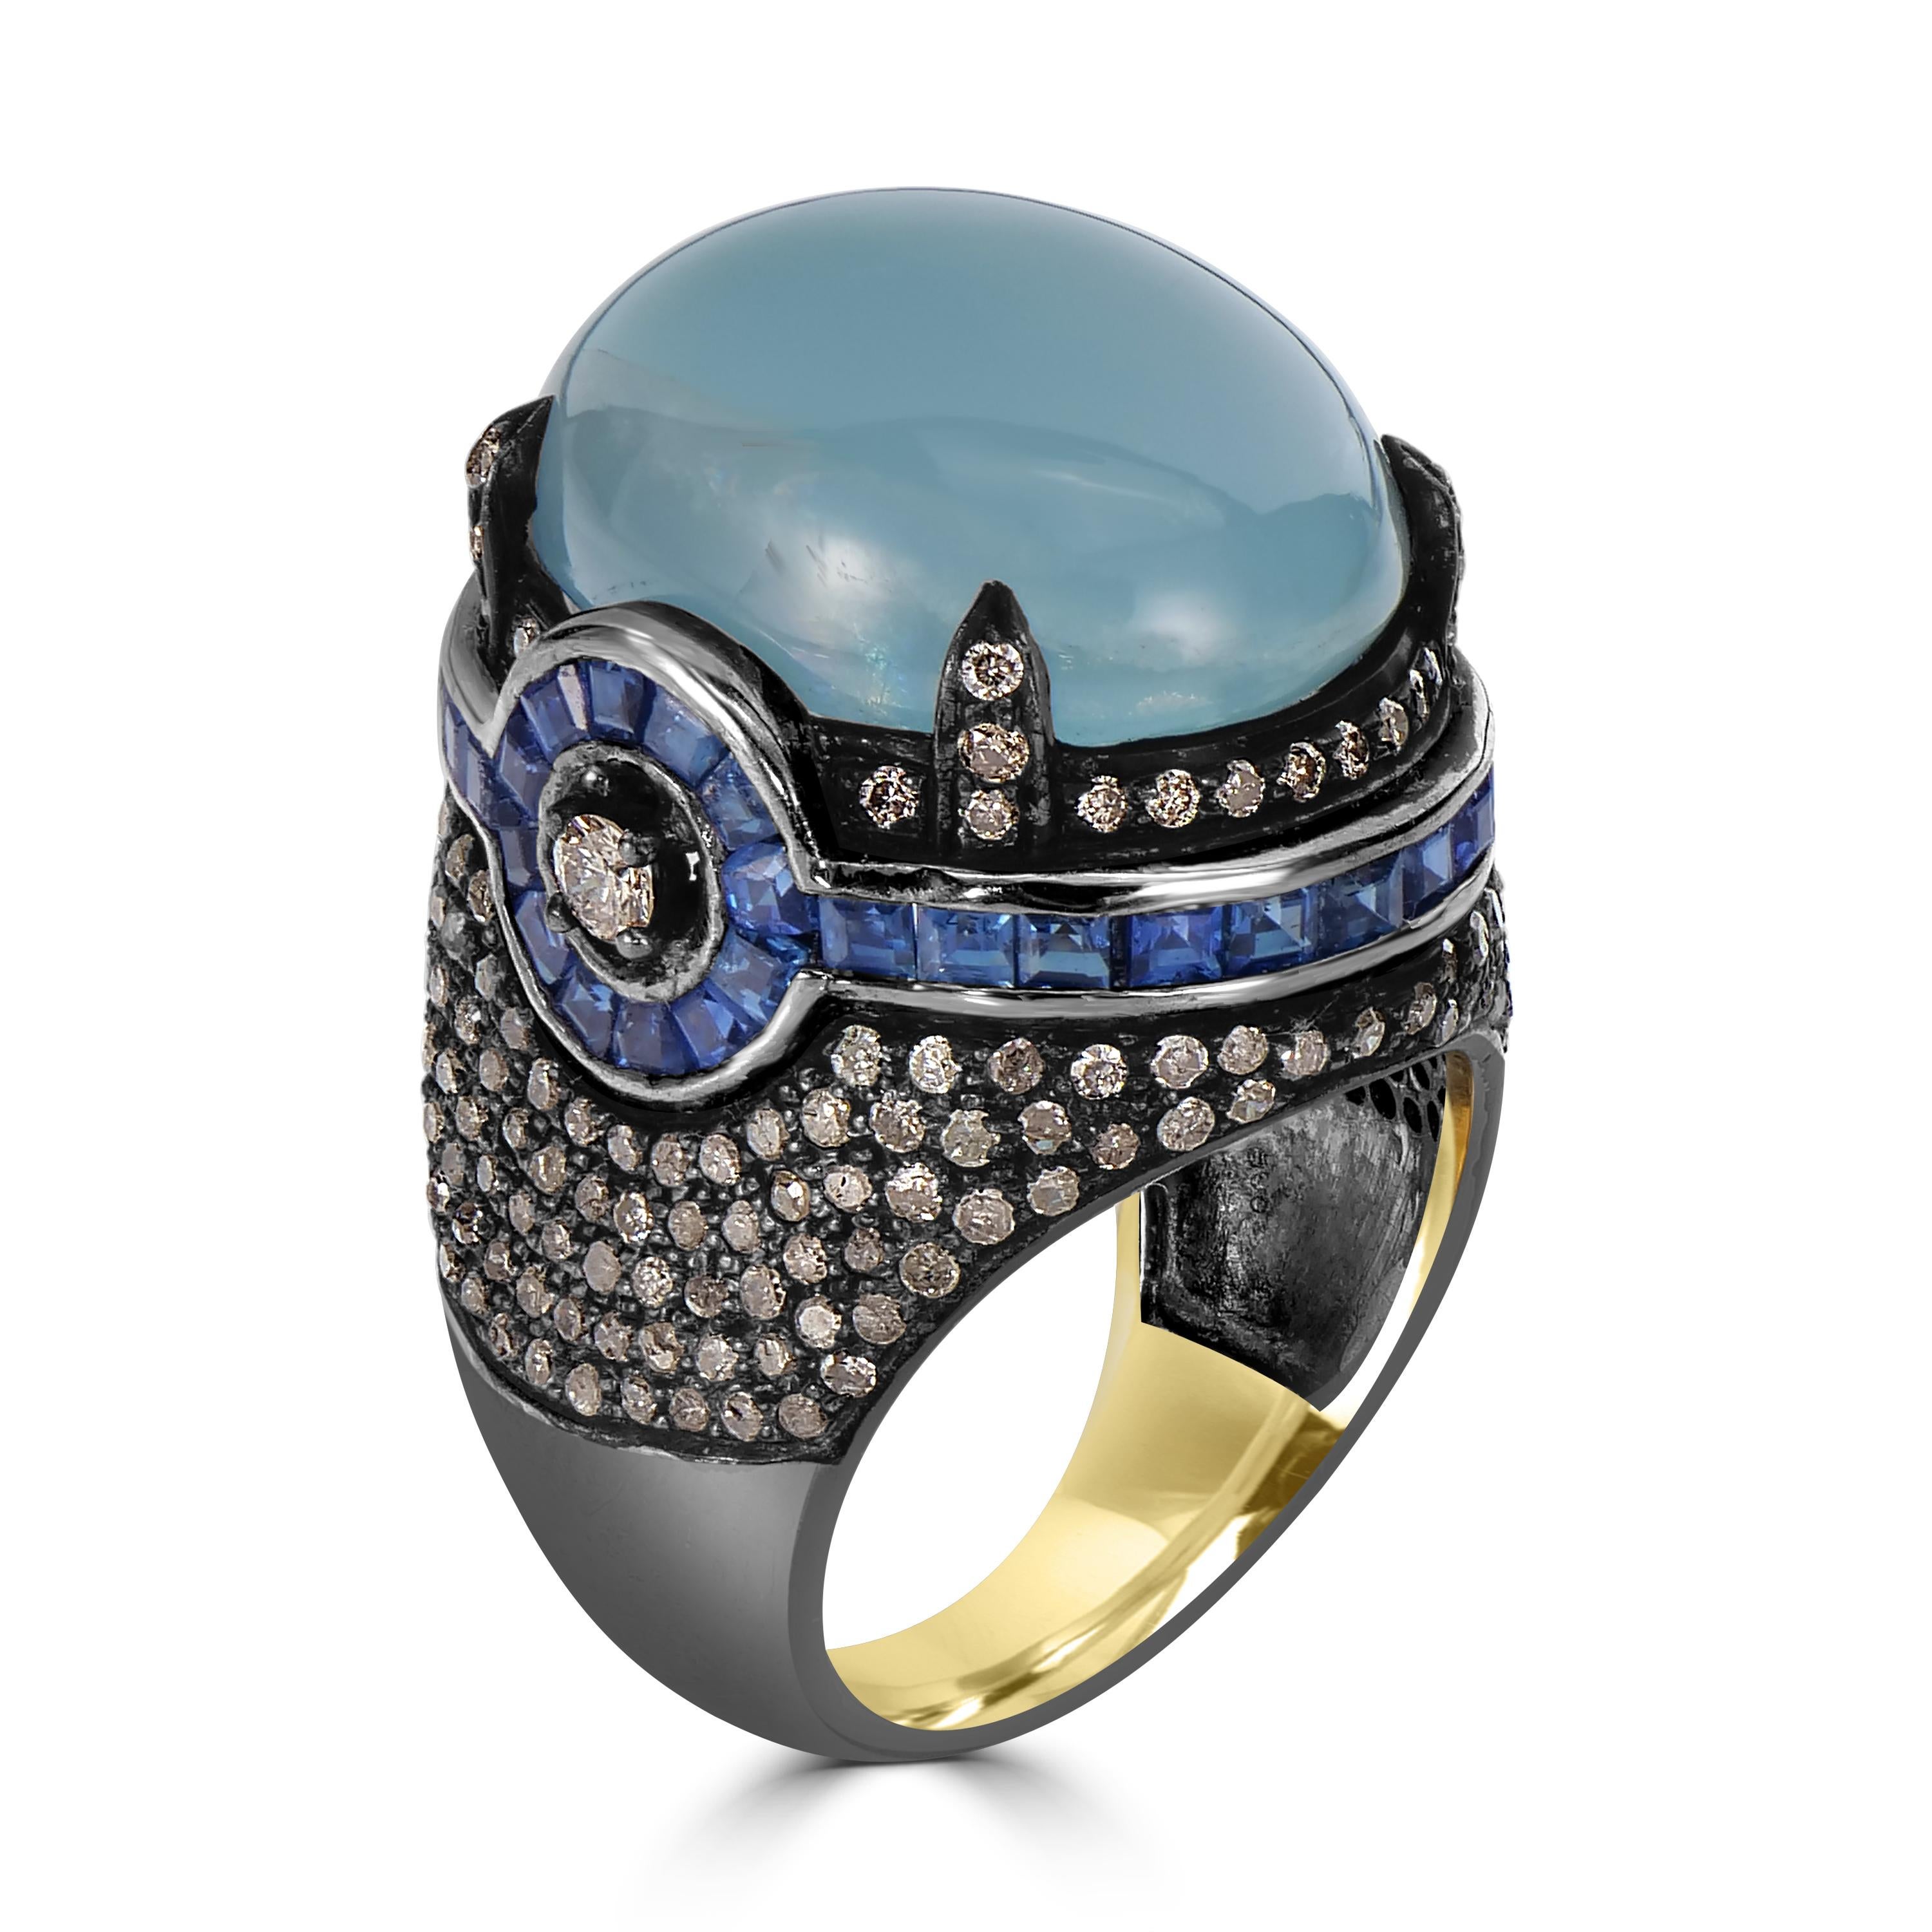 Introducing our extraordinary Victorian Dome Ring, a masterful creation that seamlessly blends the ethereal beauty of aquamarine, the regal allure of blue sapphires, and the timeless sparkle of diamonds. Crafted in 18K yellow gold and sterling